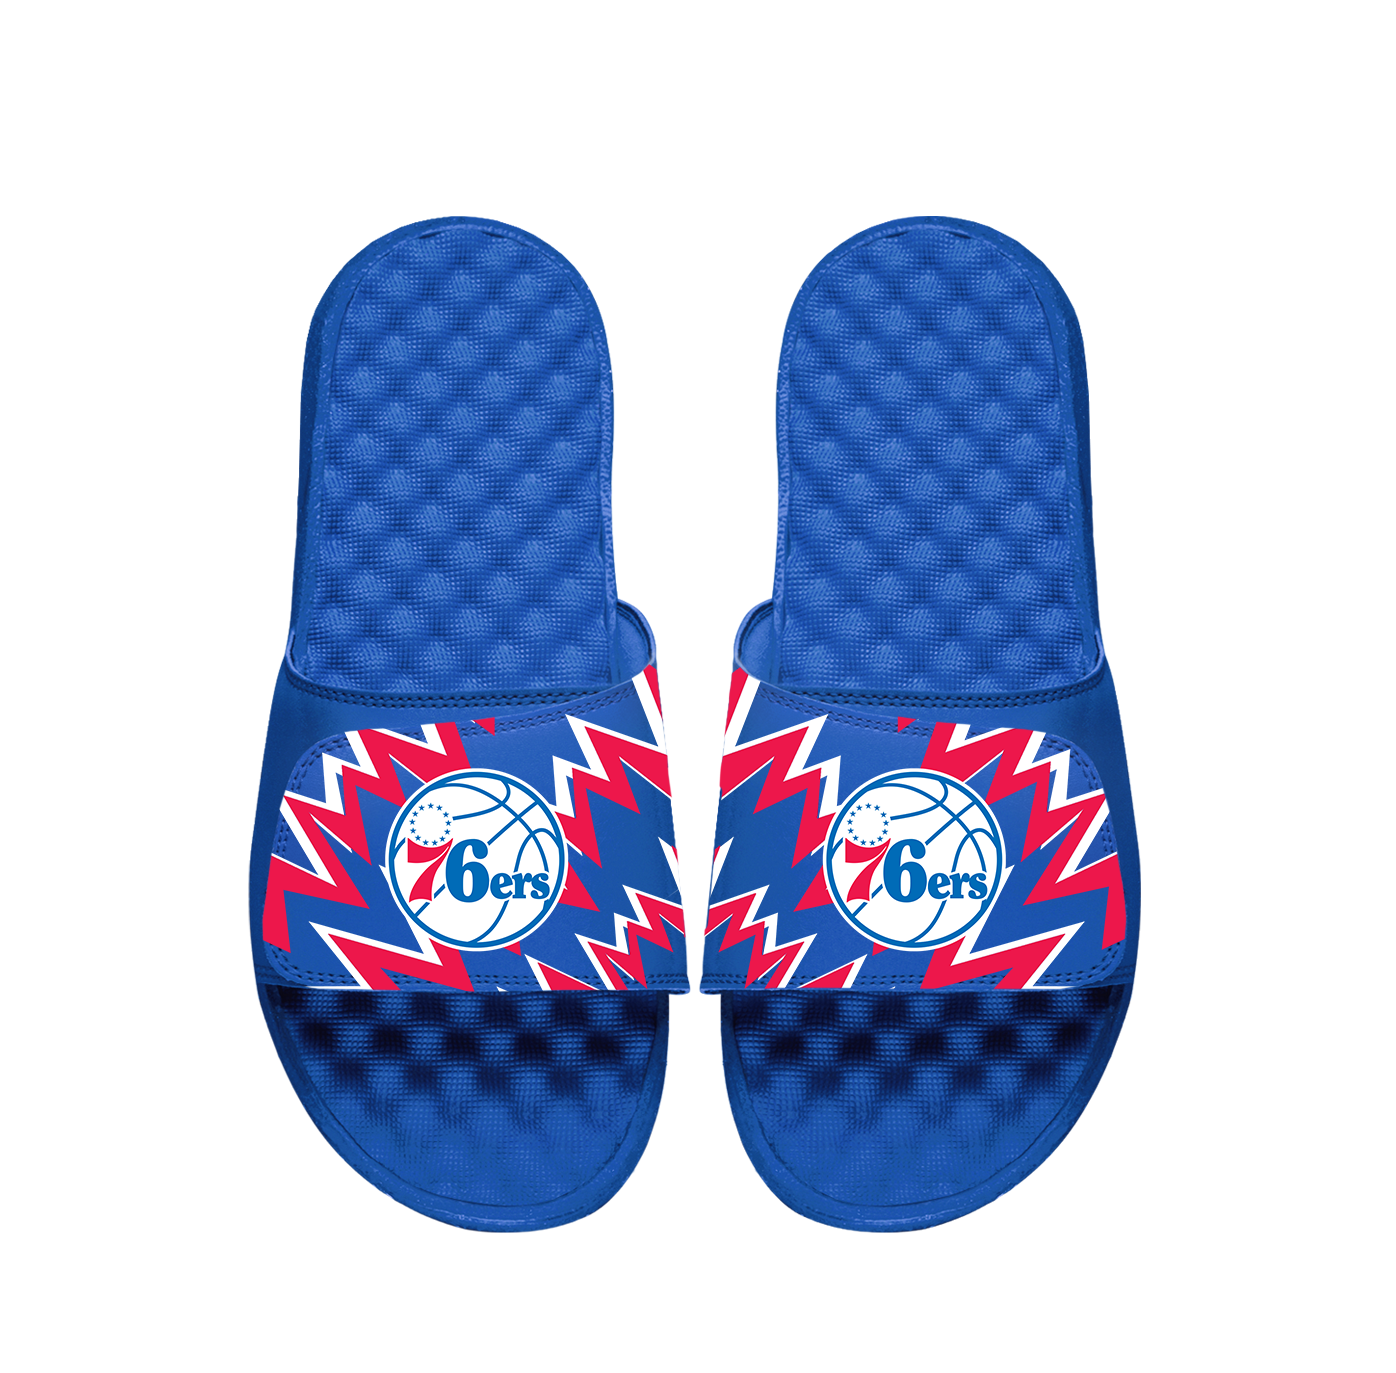 Sixers High Energy Slides